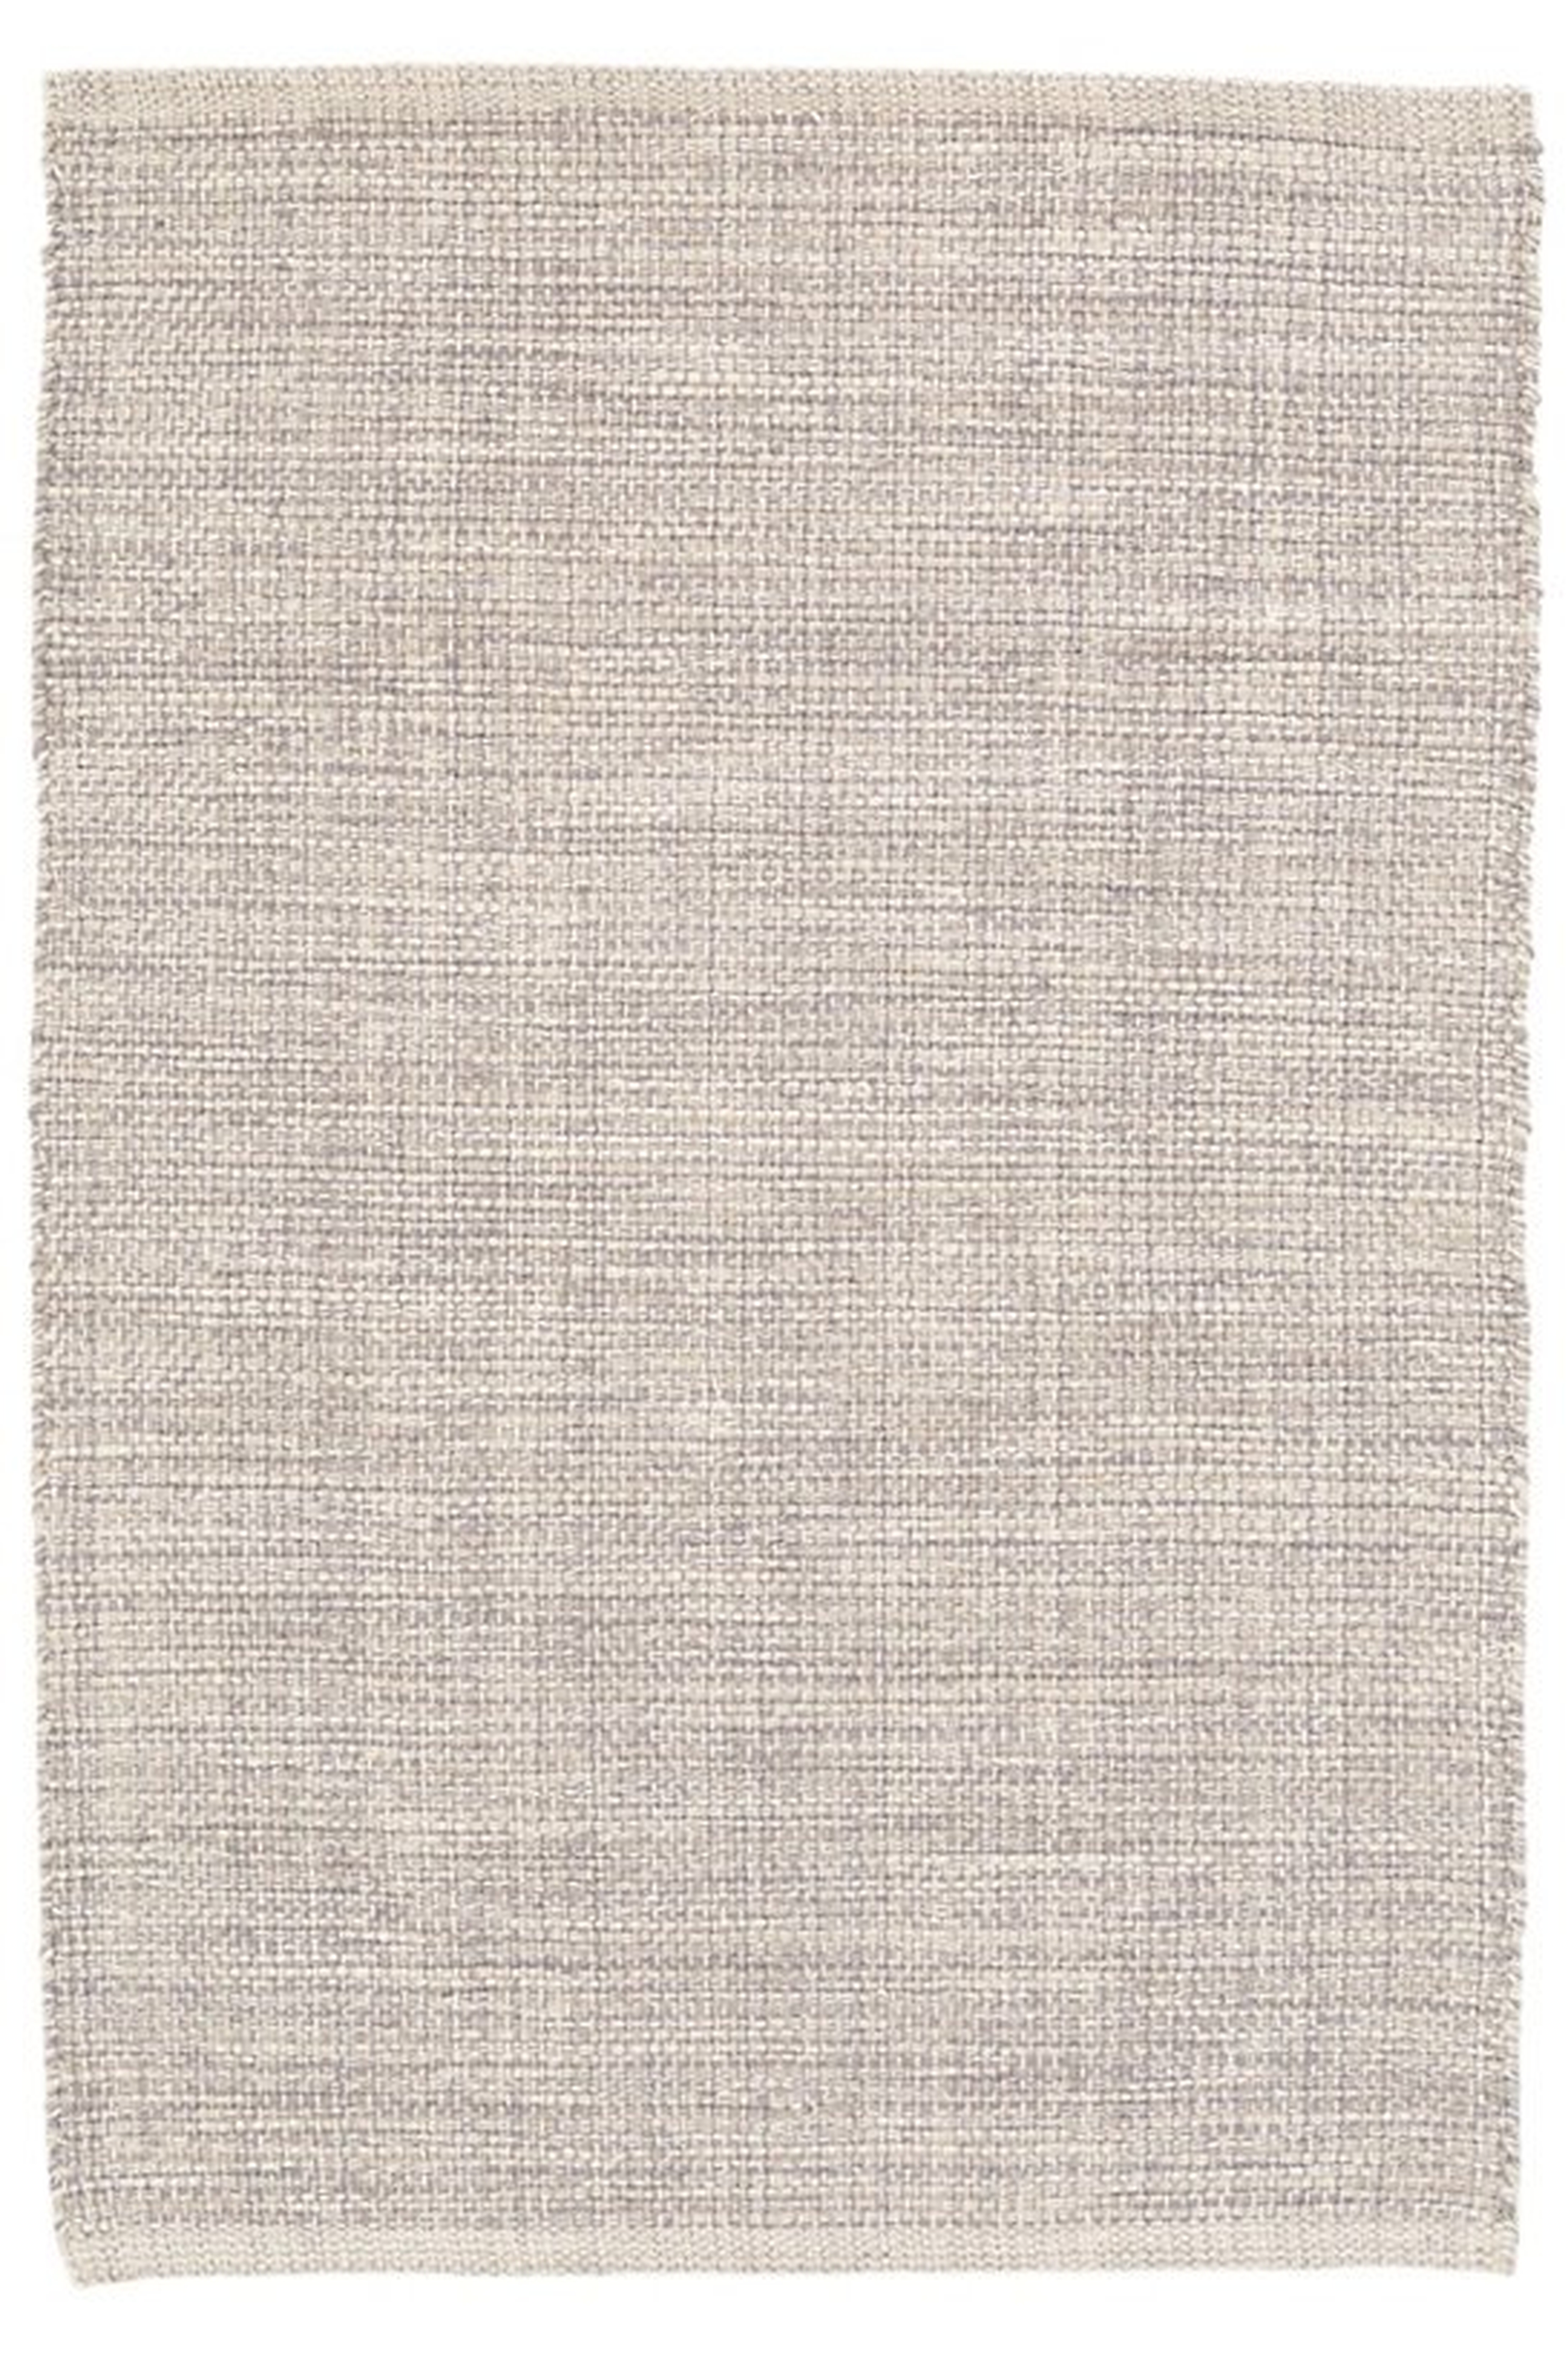 MARLED GREY WOVEN COTTON RUG - 6x9 - Dash and Albert